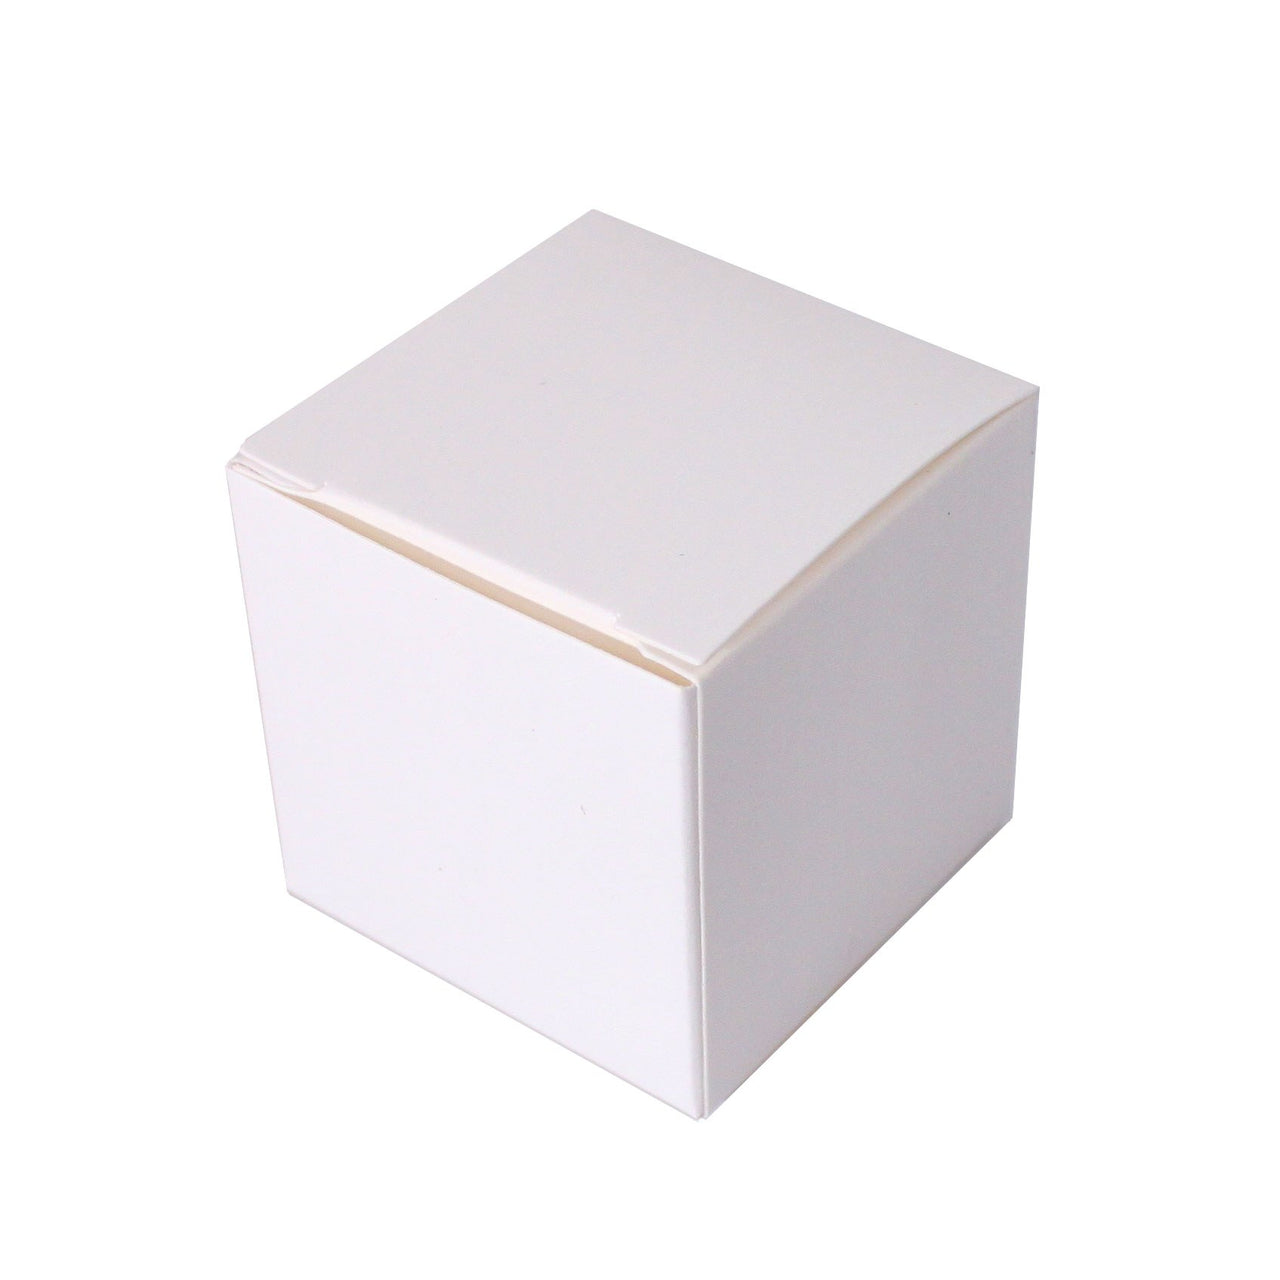 Cube Favor Box - White or Black (Set of 10) - Main Image | My Wedding Favors